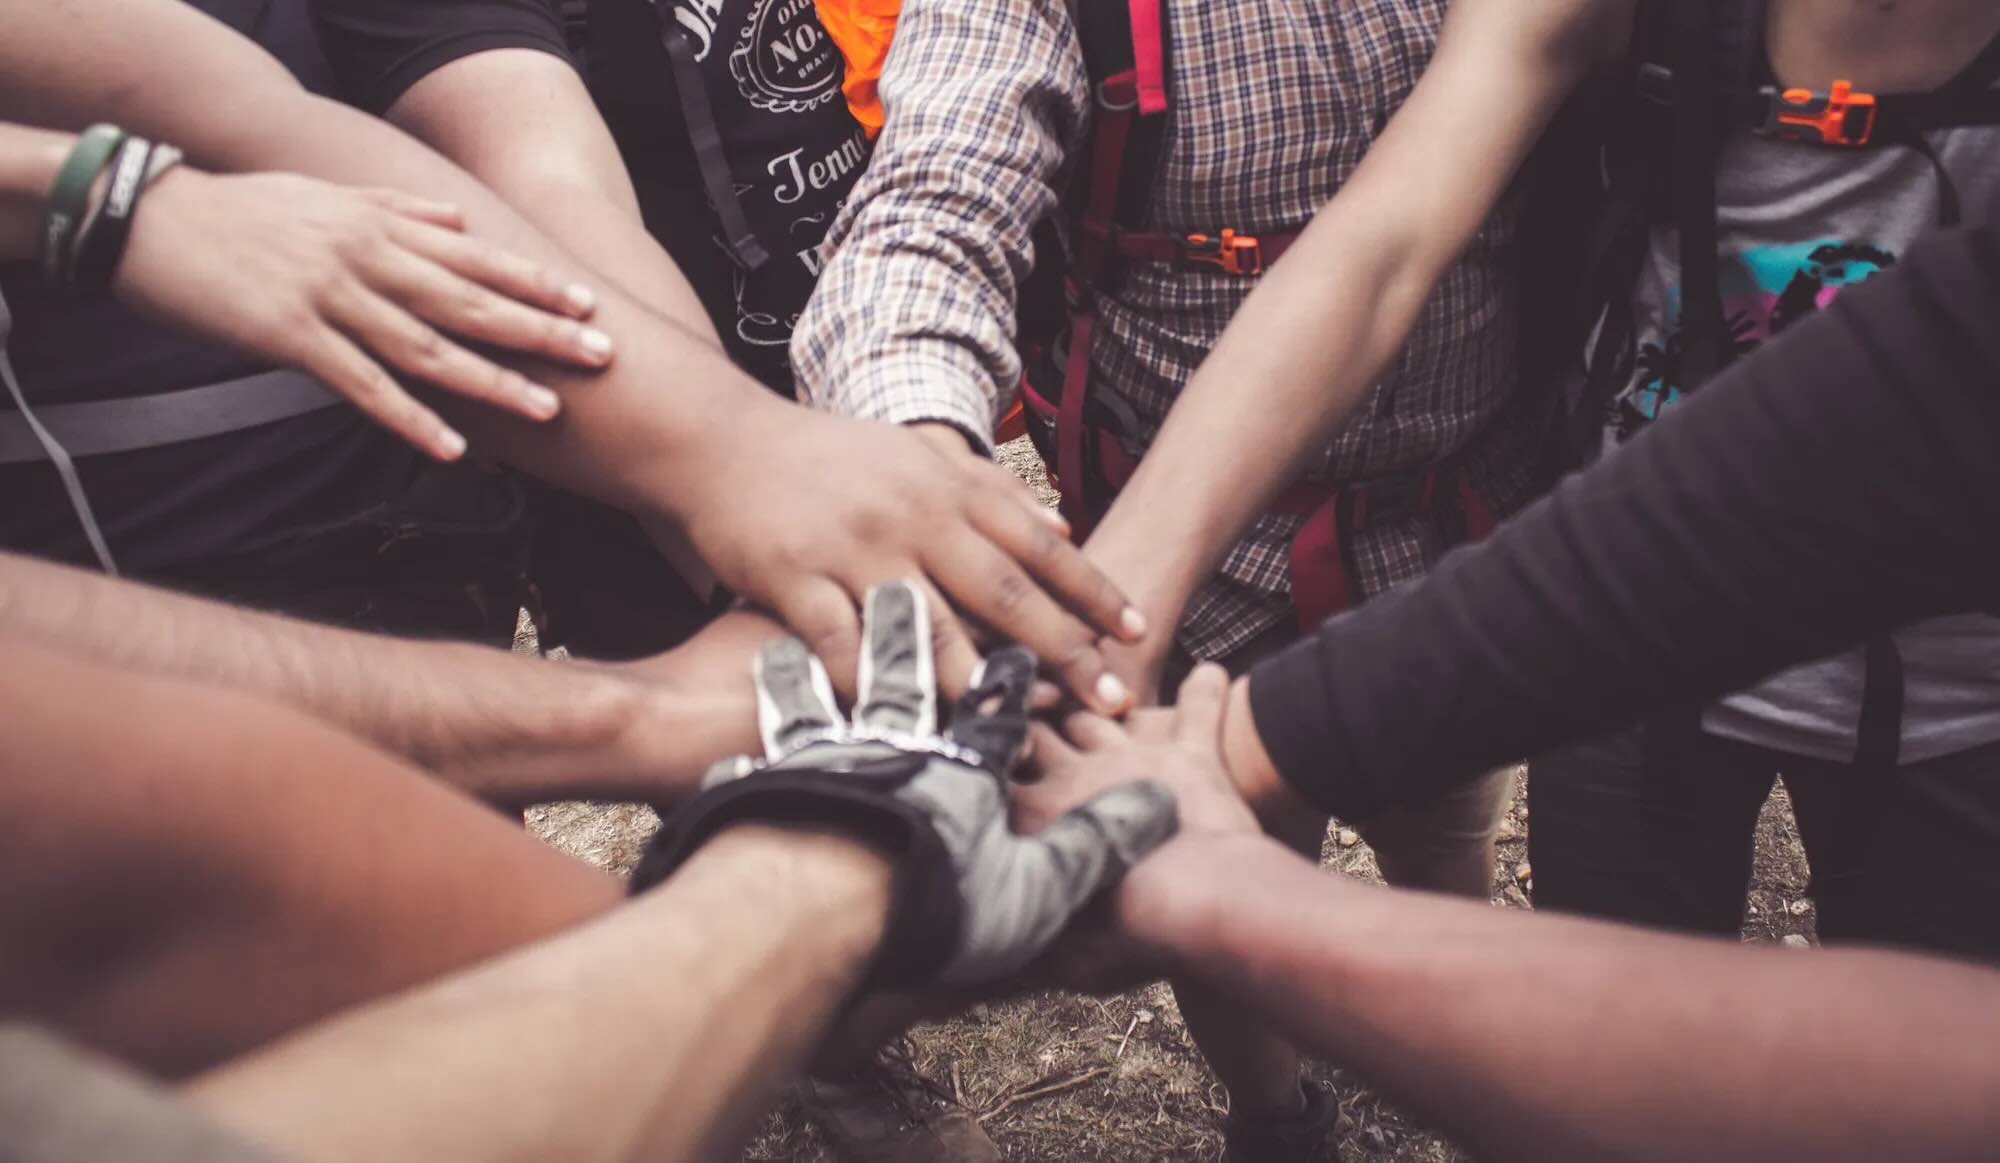 A group of people placing their hands together as a sign of teamwork